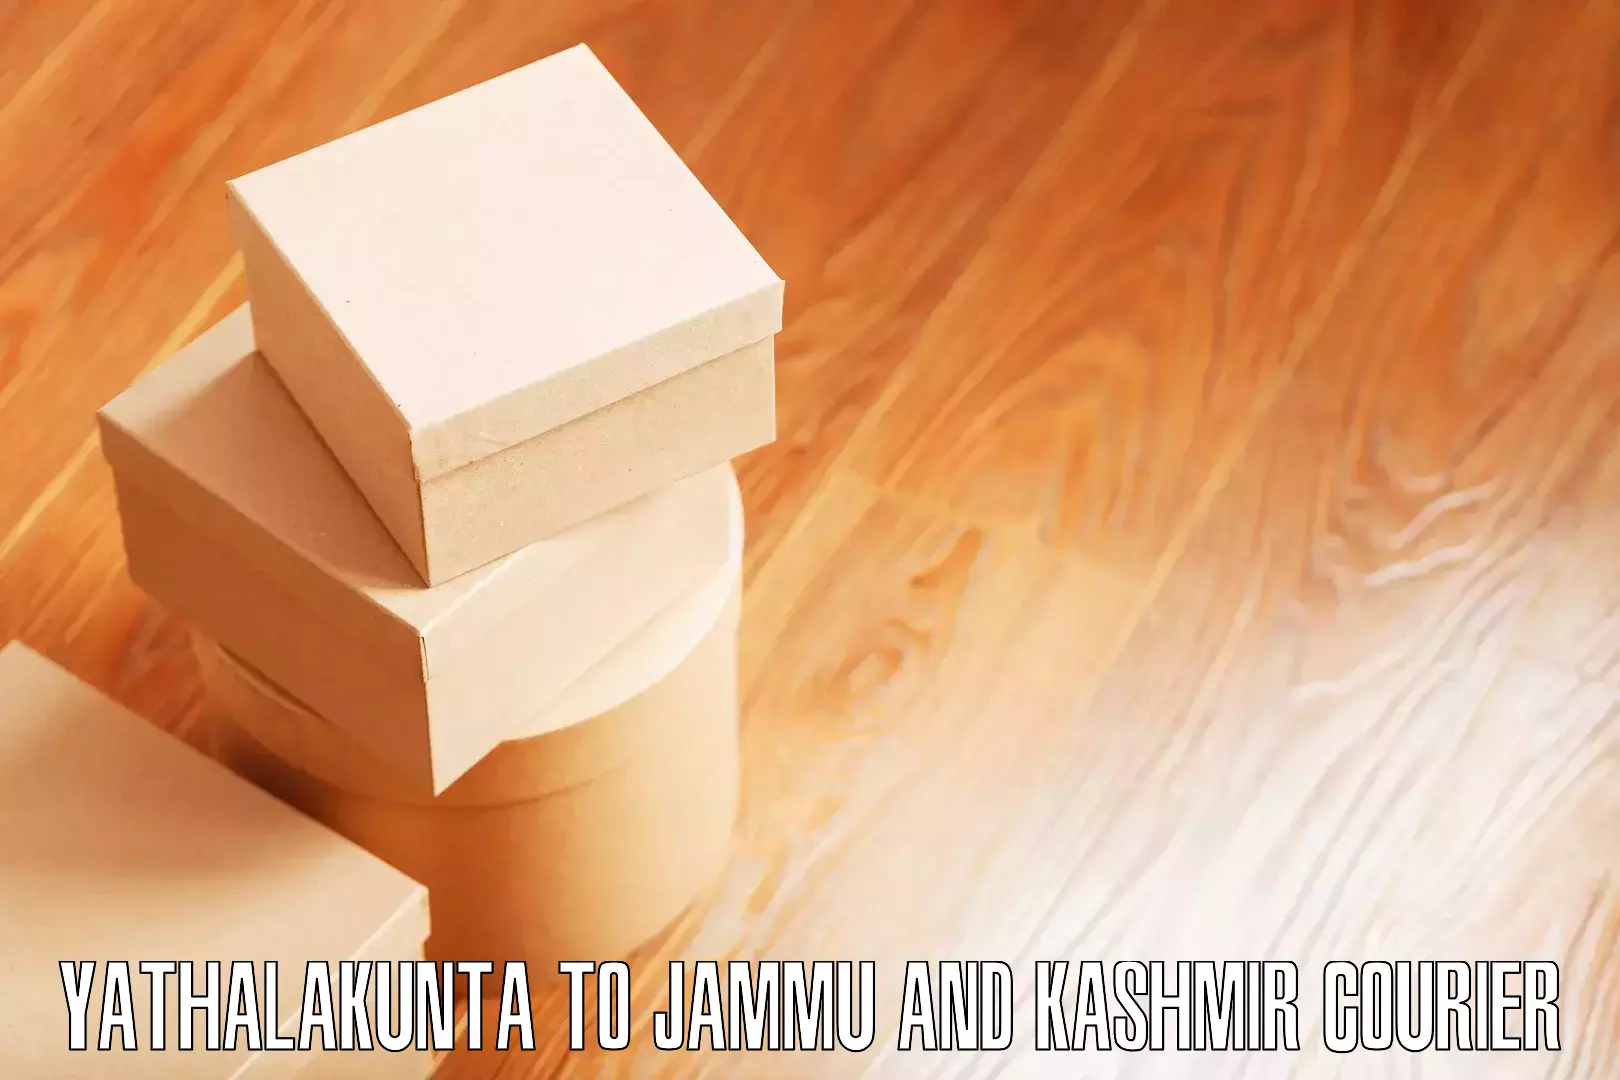 Nationwide household movers in Yathalakunta to Jammu and Kashmir